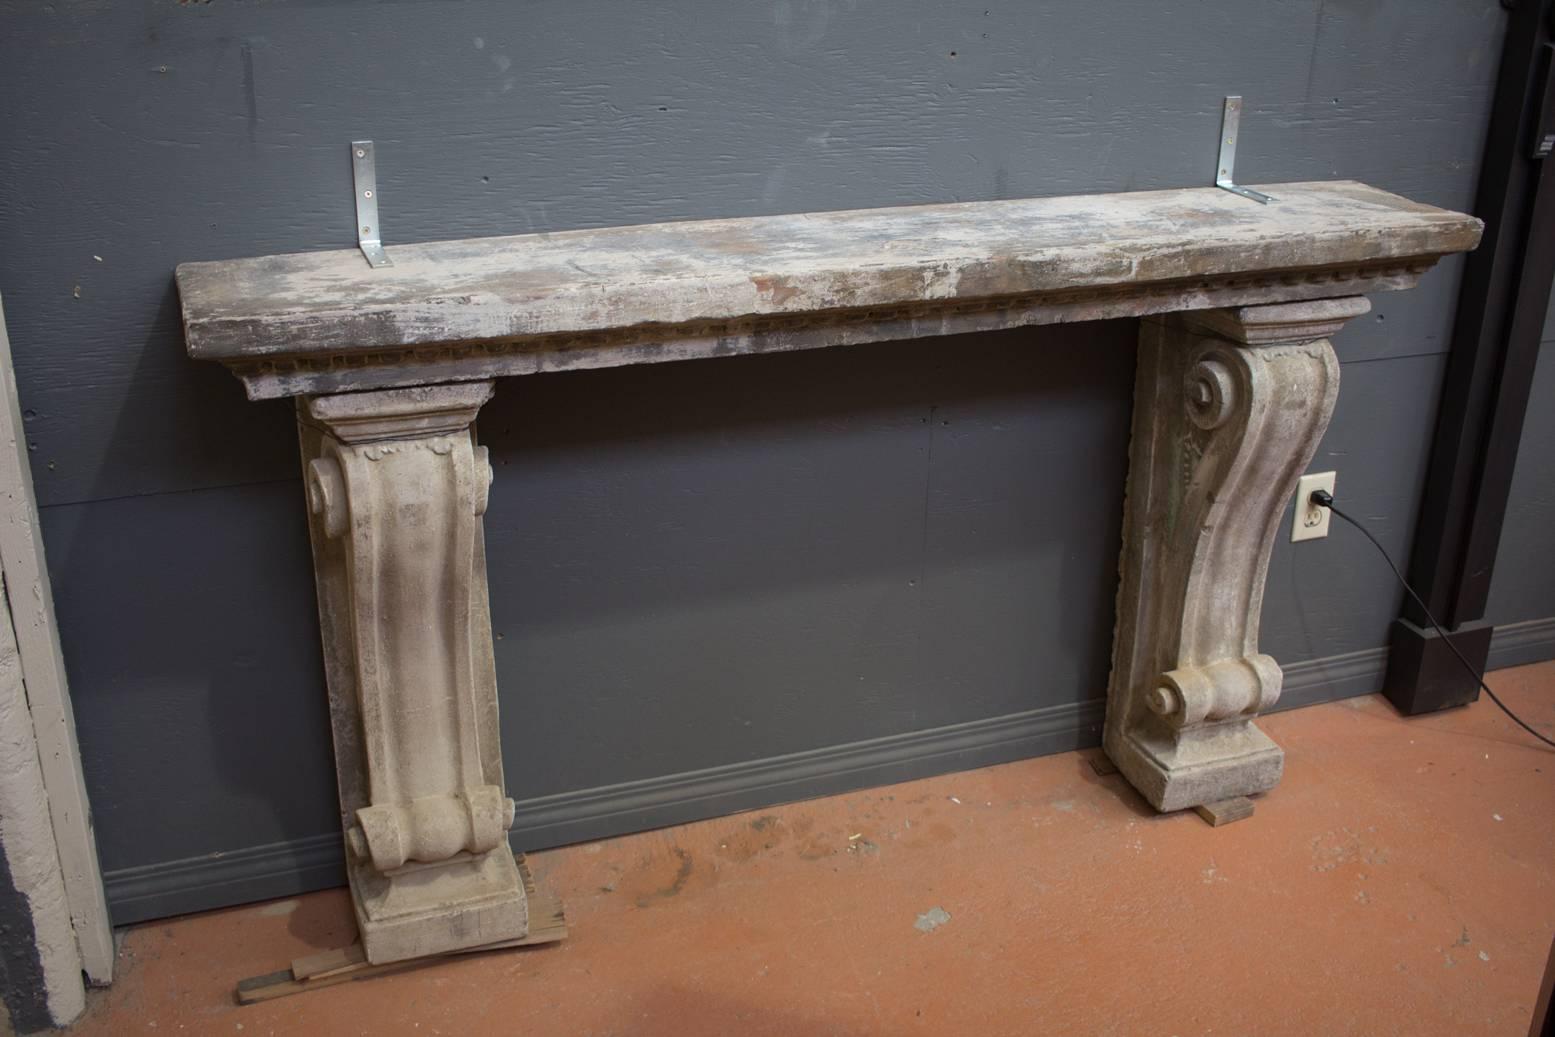 Antique composite stone console table with decorative corbels. Could also be used as a fireplace surround. Wonderful patina and texture.